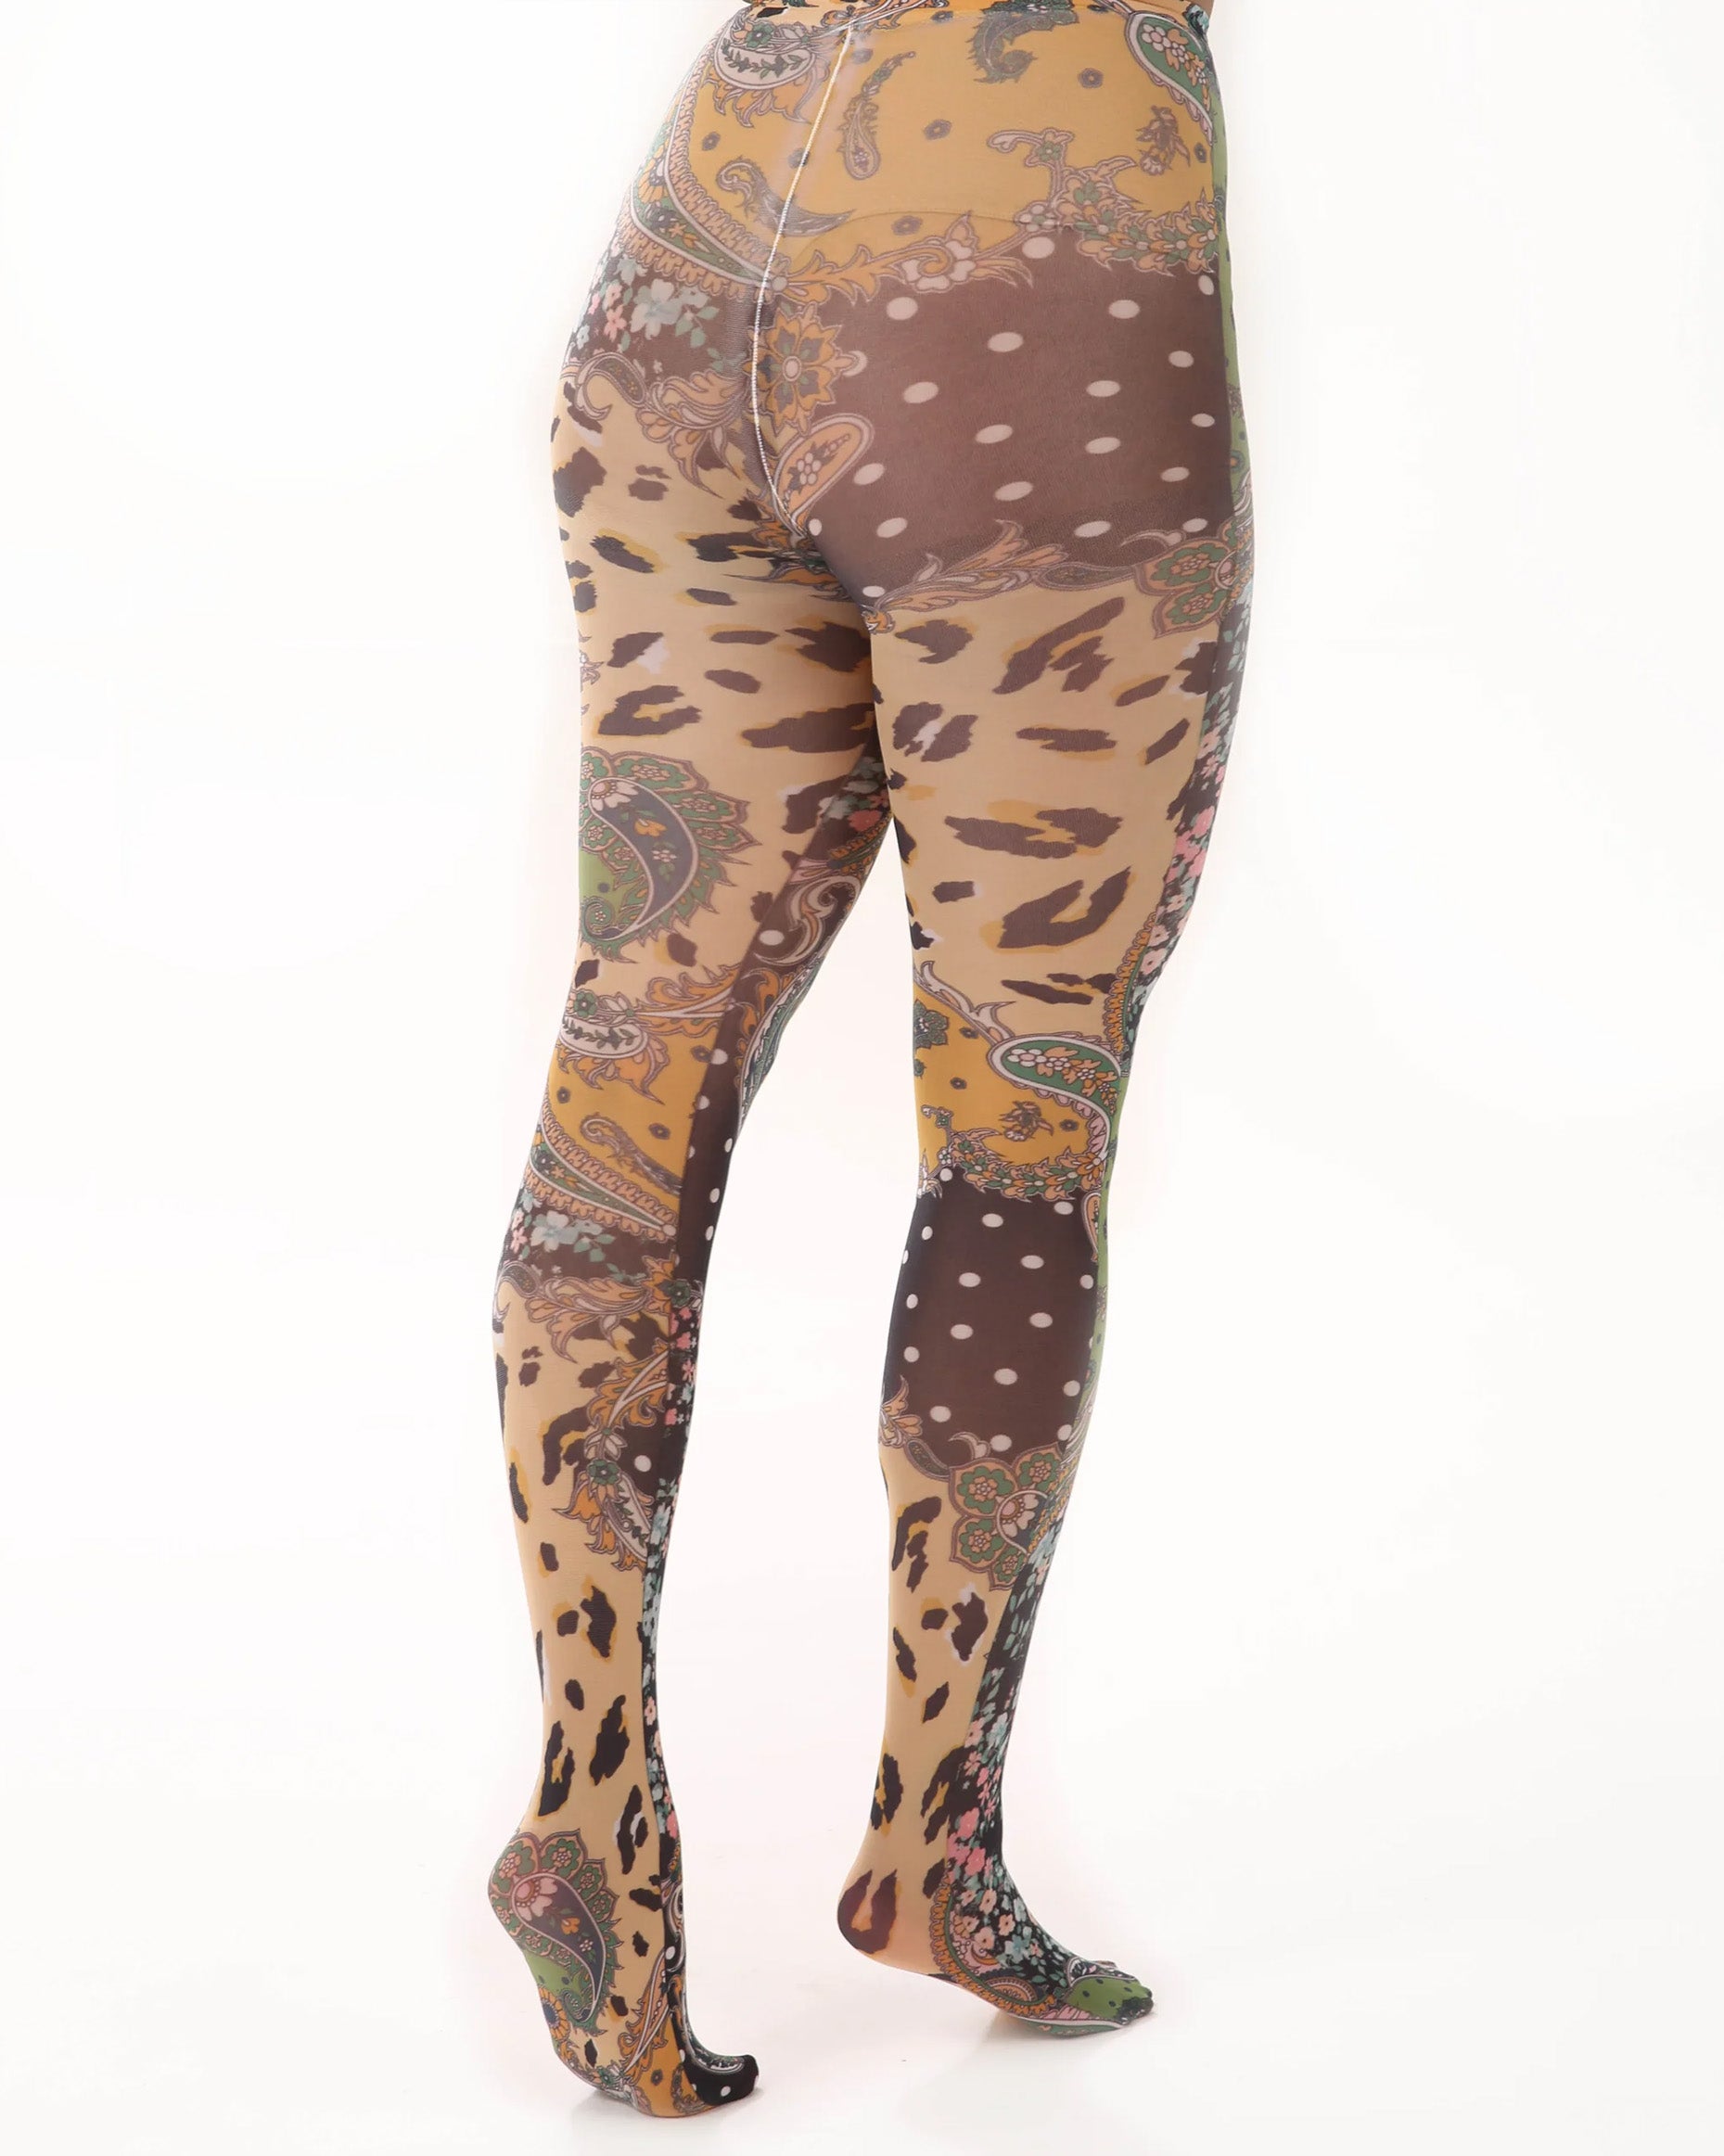 Pamela Mann Wild At Heart Printed Tights - White opaque tights with an all over digital print of a mixture of patterns including paisley, floral, polka dot and leopard print. Back view